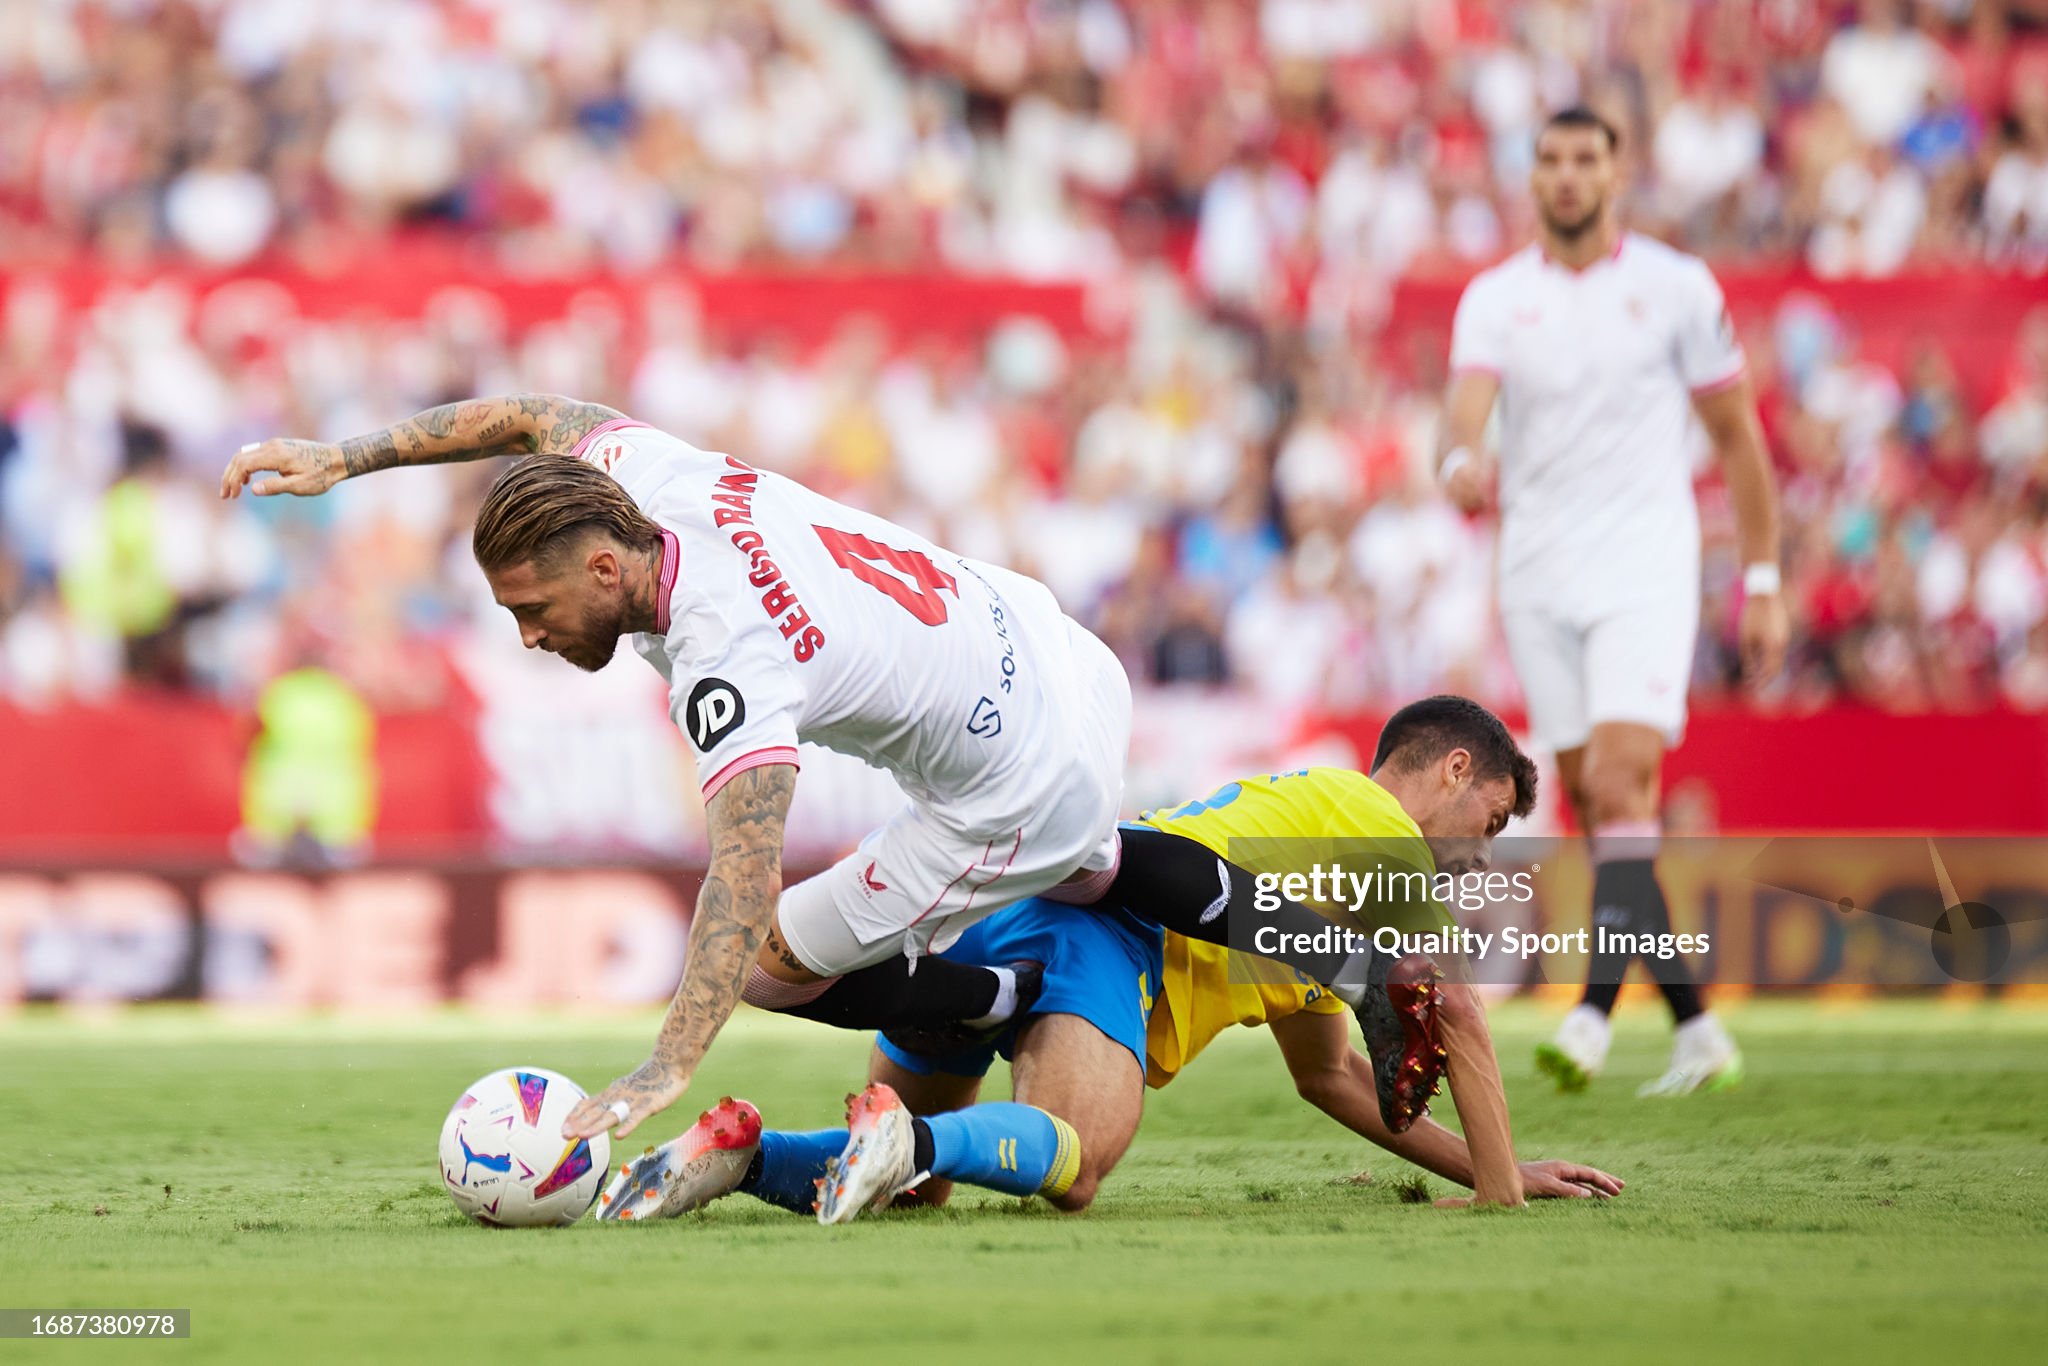 After eighteen years, Ramos makes a winning return to Sevilla: 'I can die in peace'